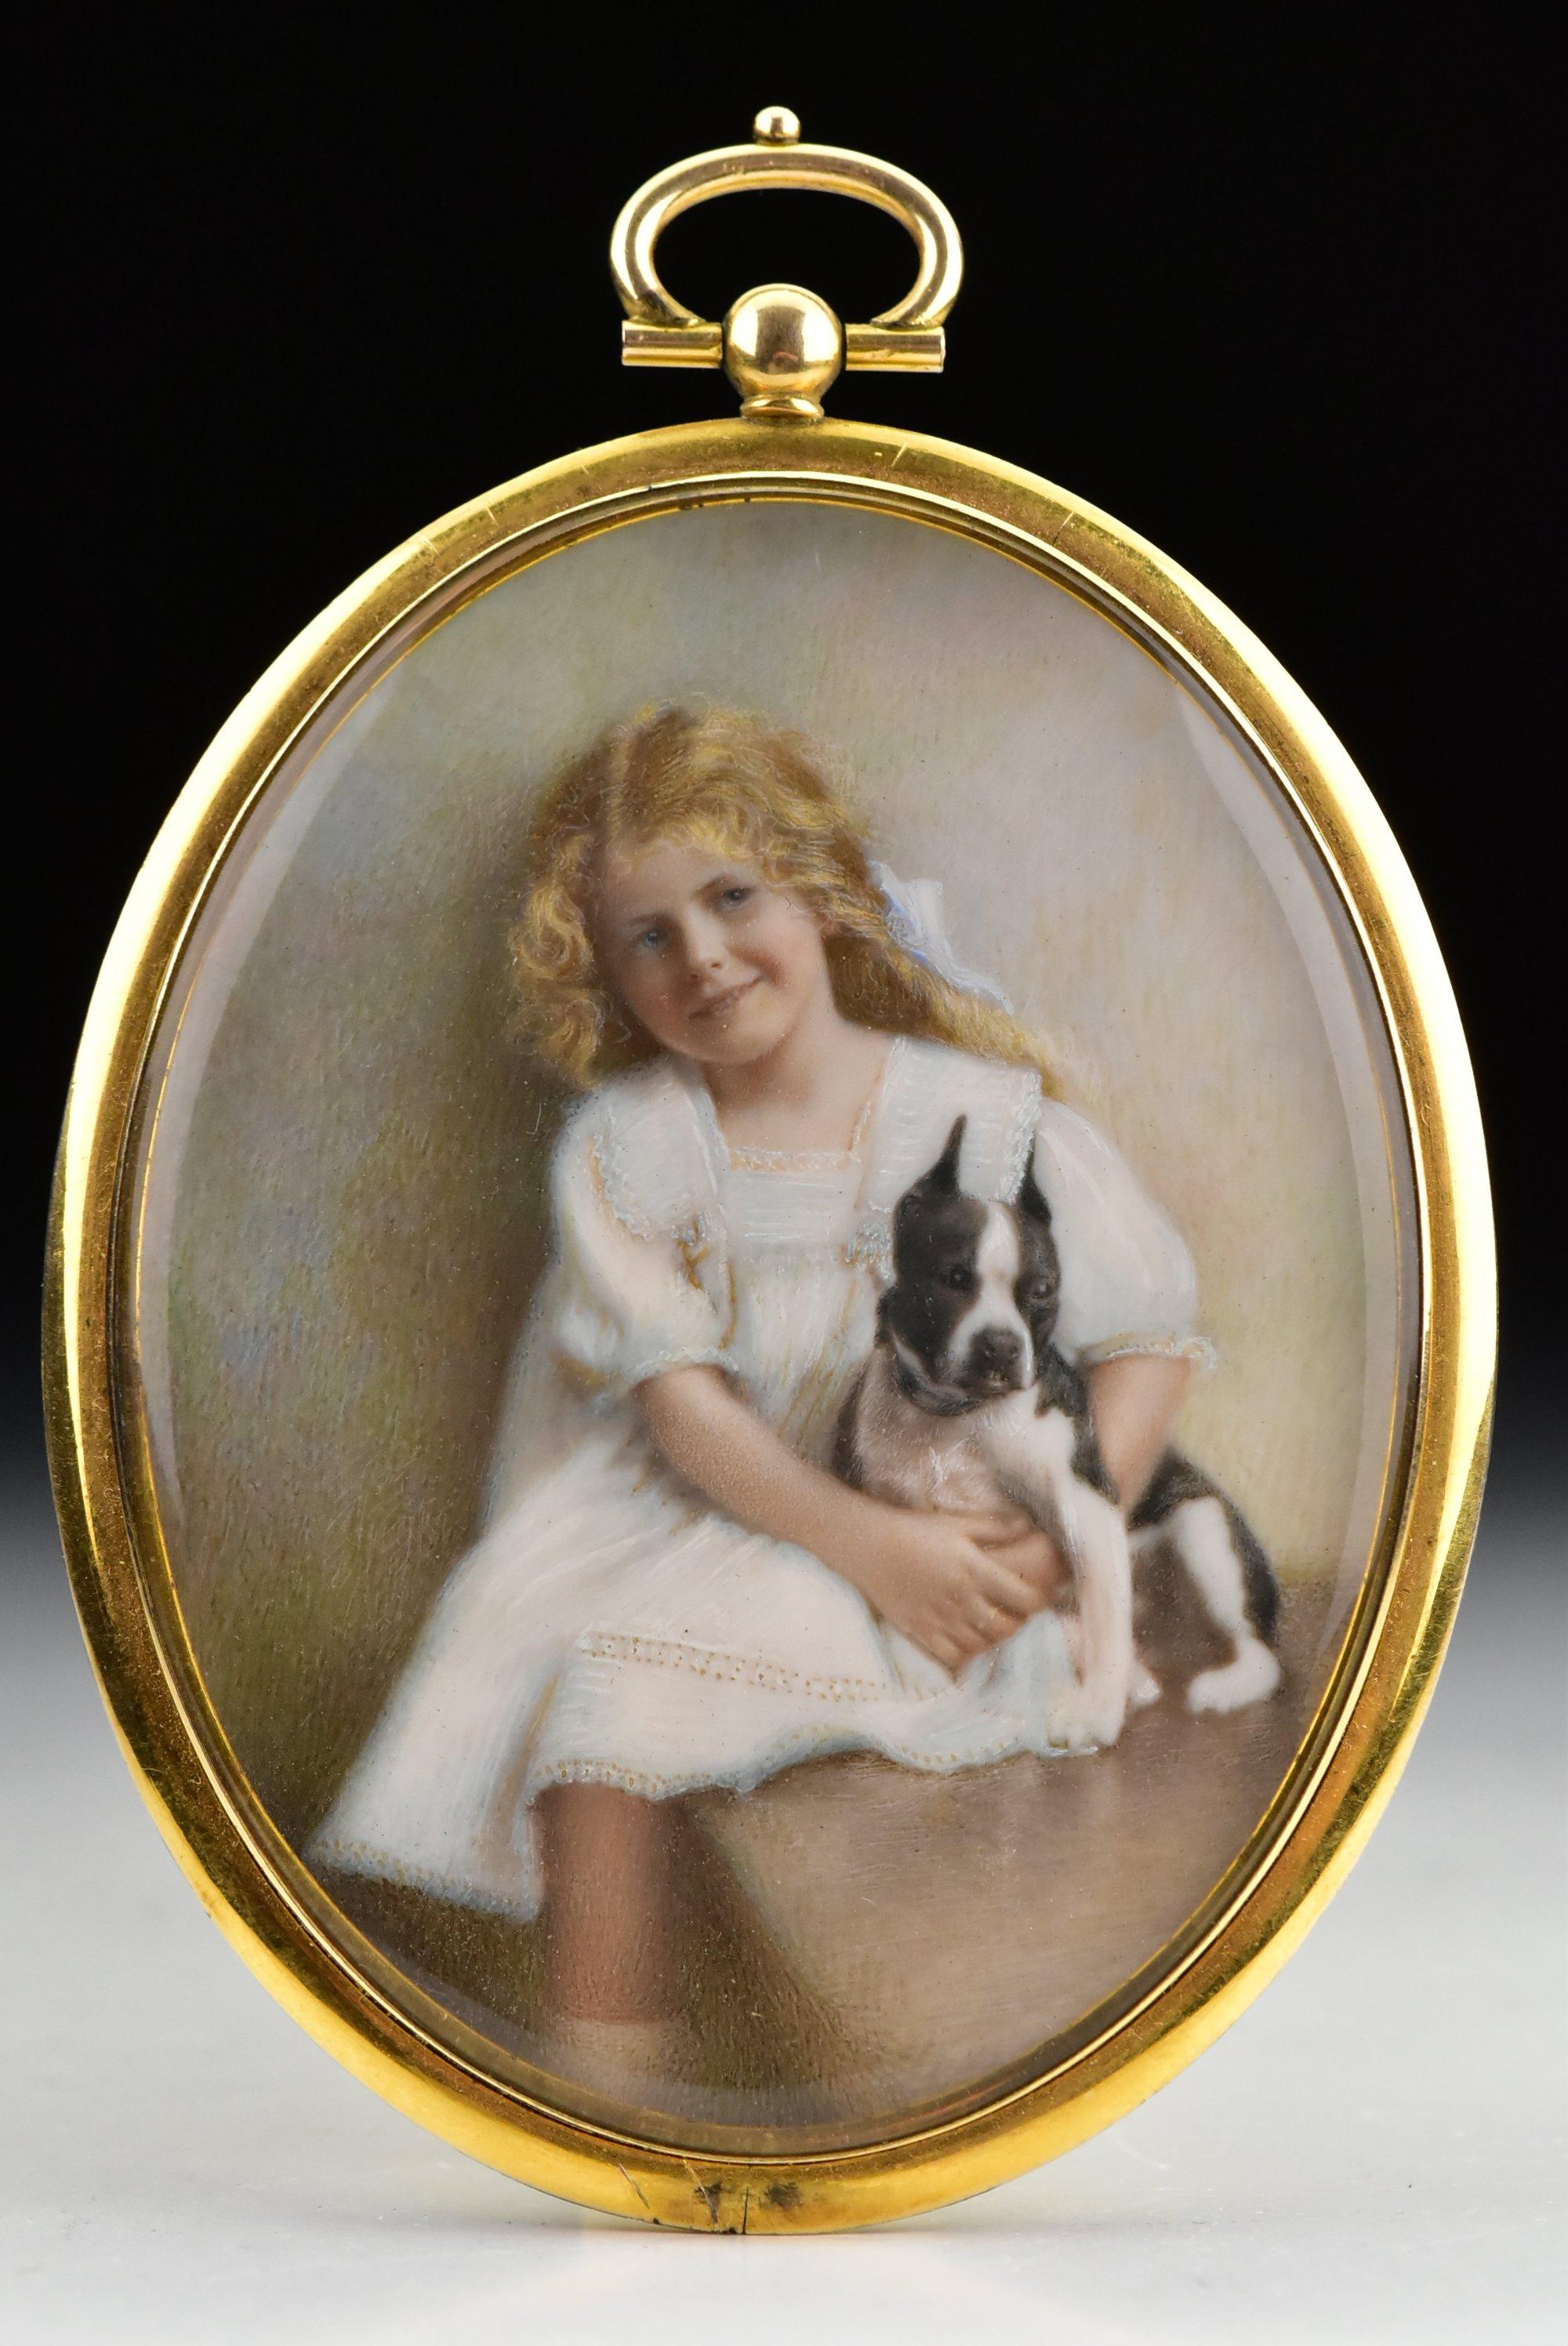 Description: Miniature portrait painting of a young girl seated with her arms around her terrier, set in a gold gilt frame with bale at the top.

Age: Early 20th century.

Size: What can be seen of the painting itself measures approximately 3 +